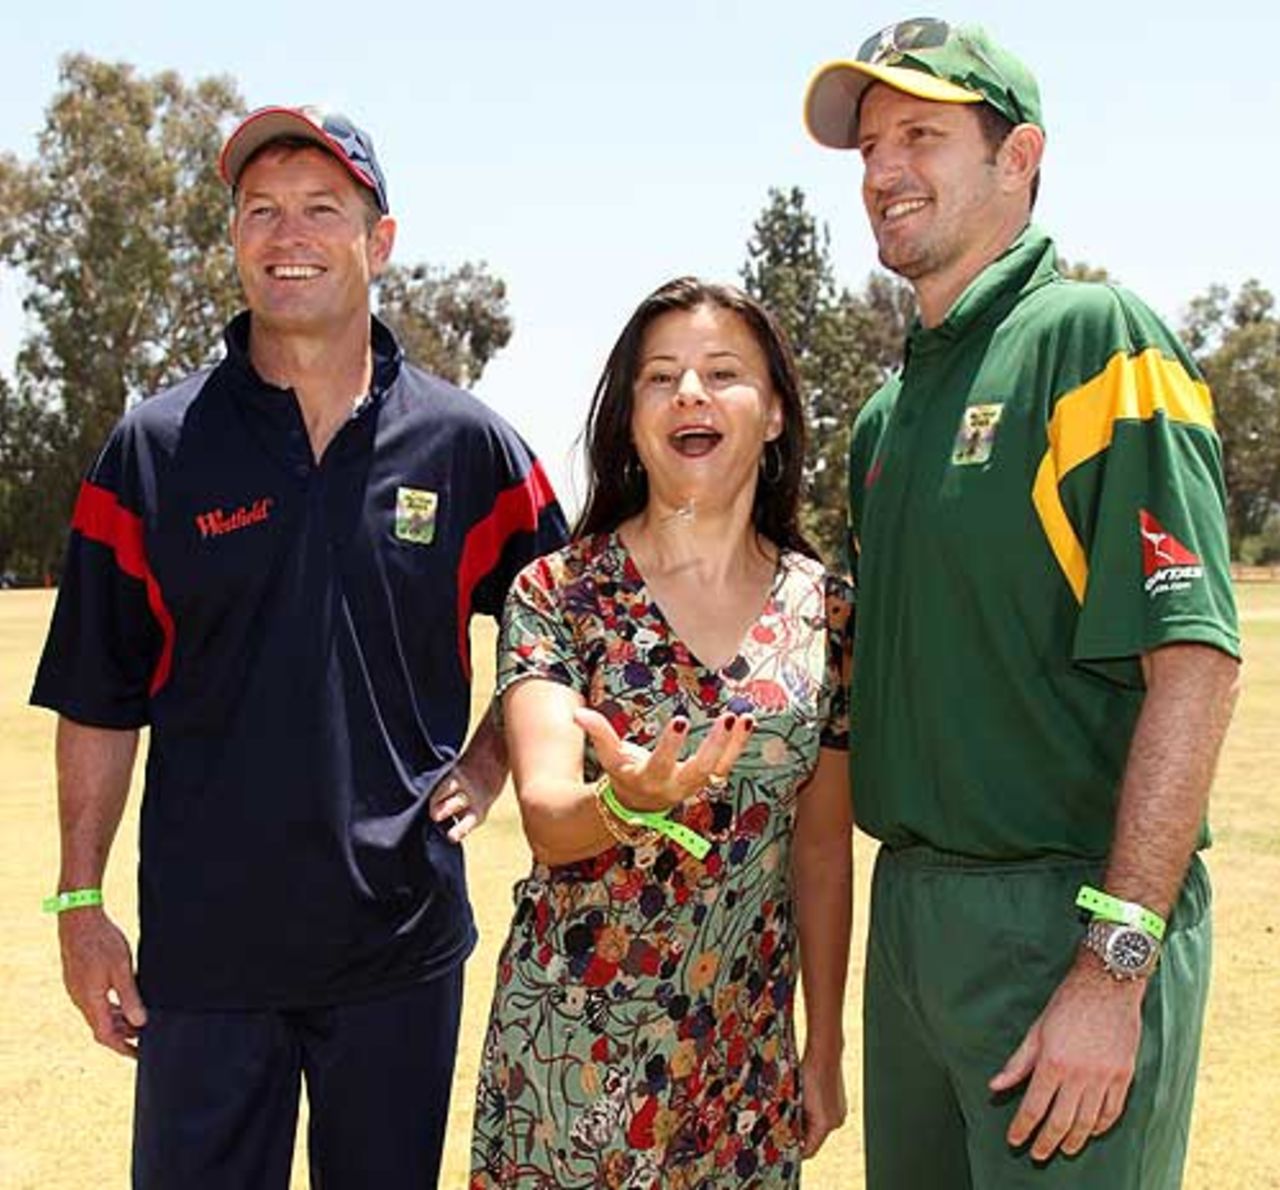 Graeme Hick and Michael Kasprowicz with Hollywood actress Tracey Ullman at the Westfield Hollywood Ashes match, Van Nuys, California, May 9, 2009